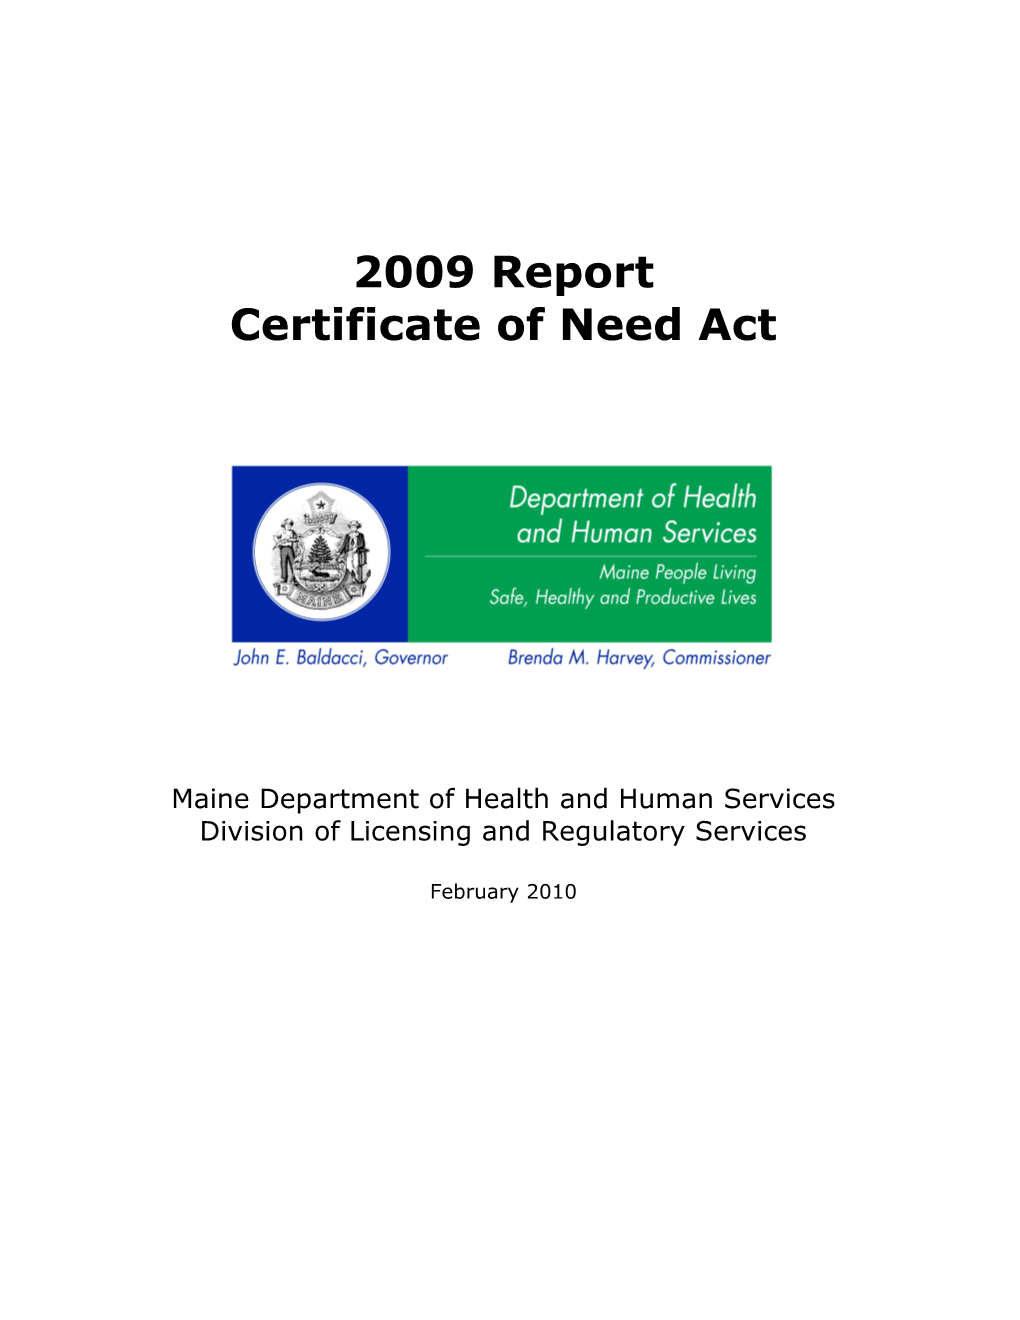 Certificate of Need Act